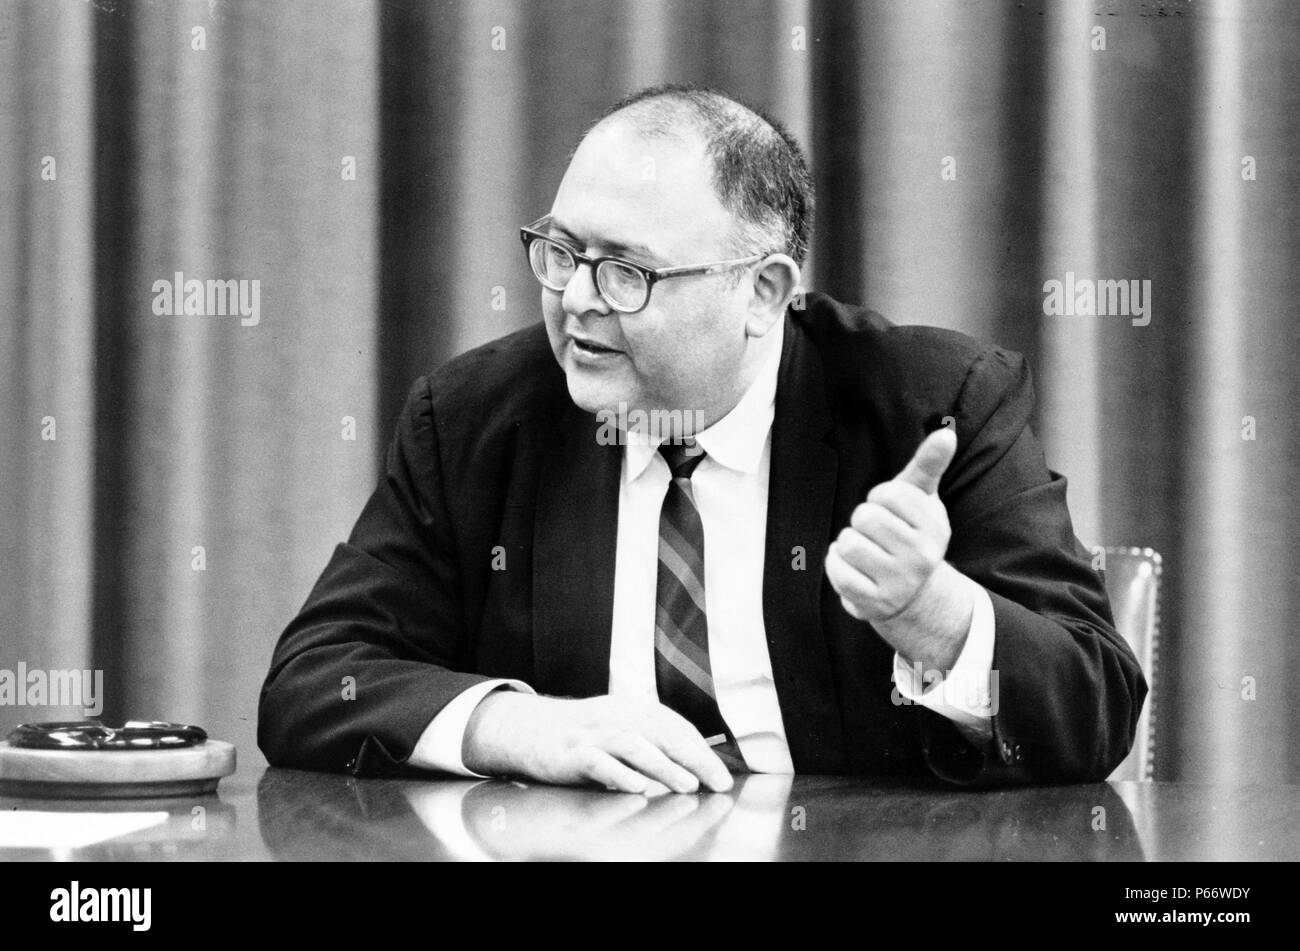 Interview with Herman Kahn 1922-1983., author of On Escalation 1965. Herman Kahn (February 15, 1922 – July 7, 1983) was a founder of the Hudson Institute and one of the preeminent futurists of the latter part of the twentieth century Stock Photo